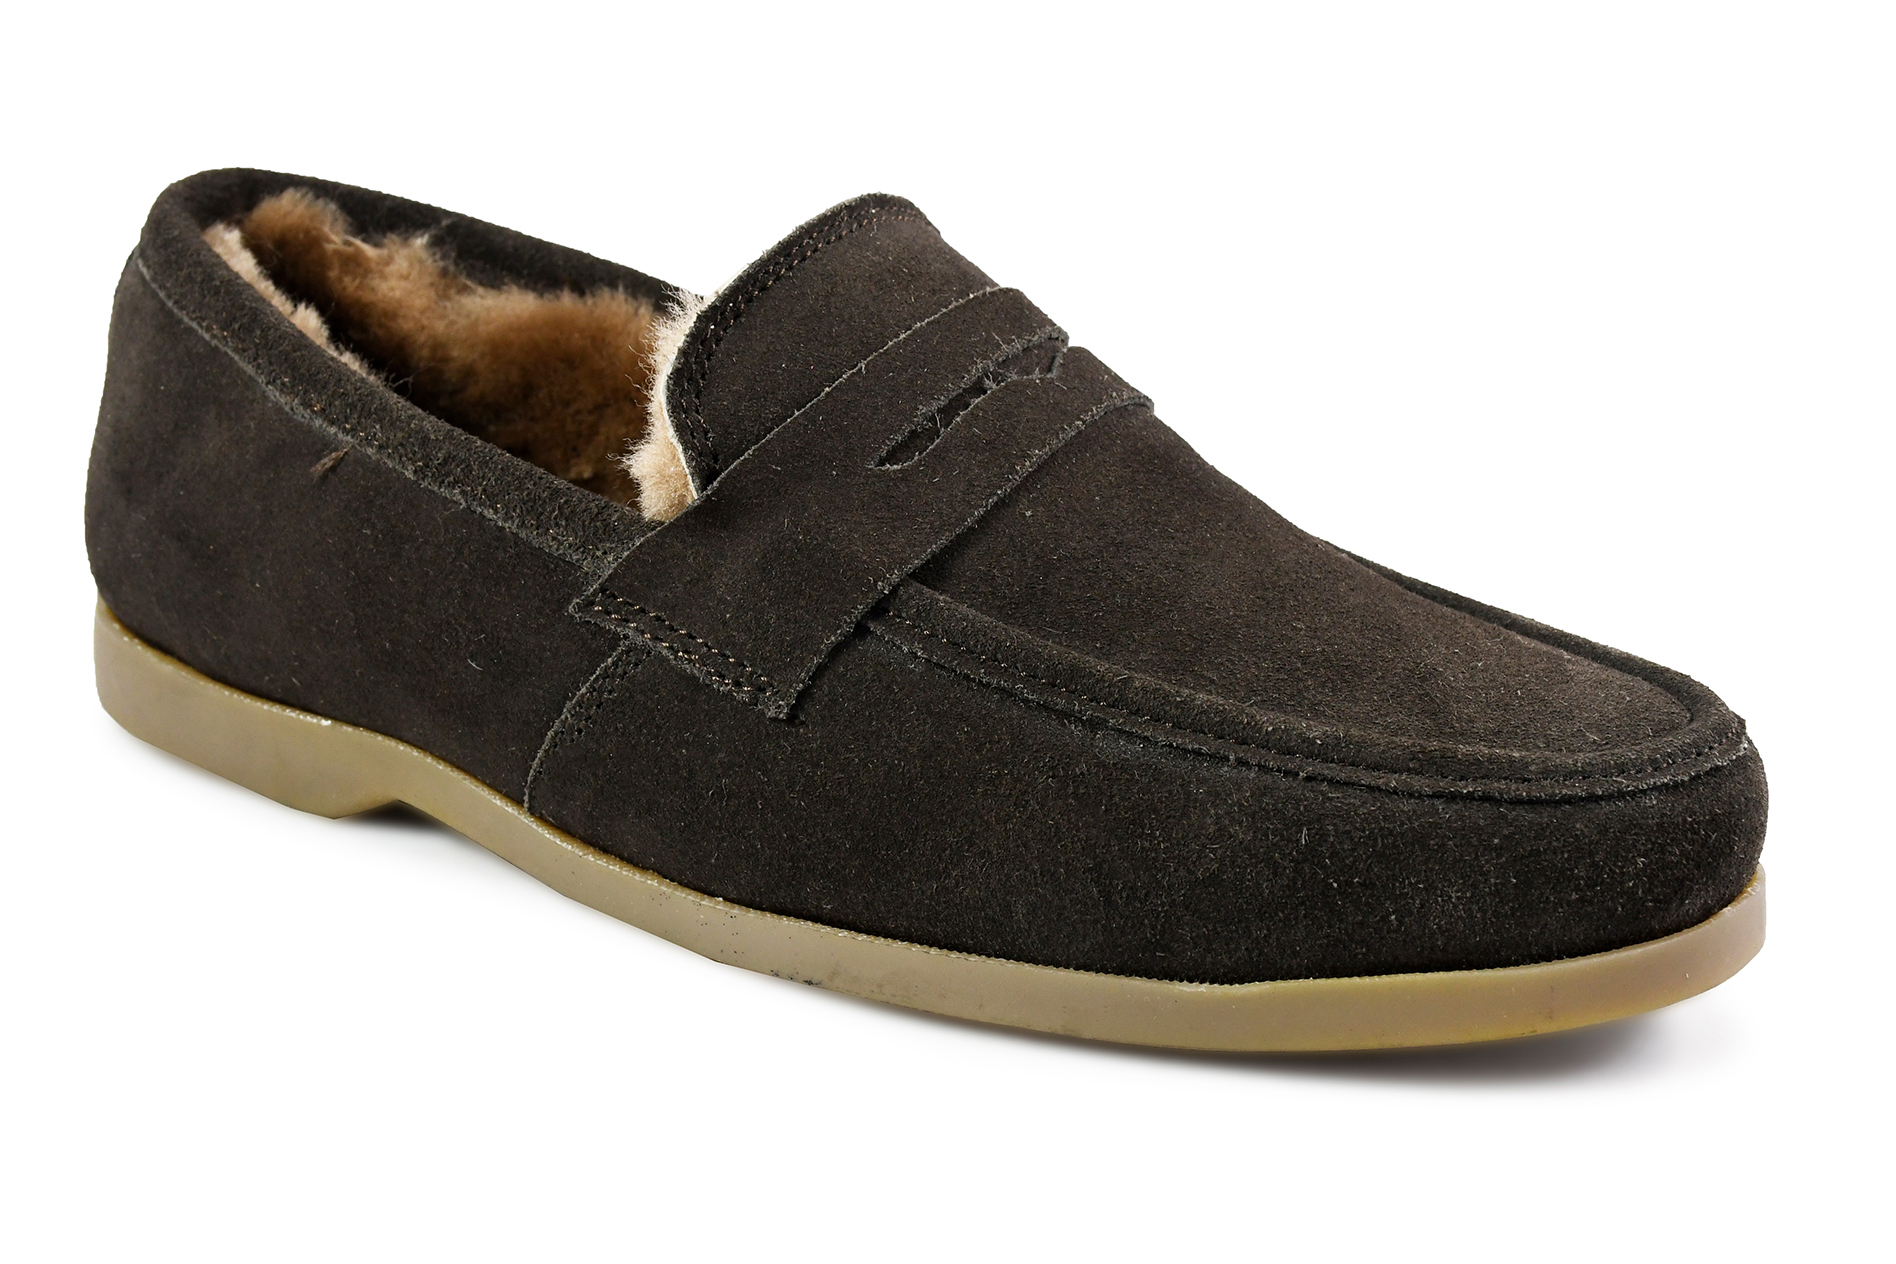 Winter Shoes : Brown Moccasins with Fur, breathable Suede Leather Upper, genuine fur Lining with fur footpad for optimum Ultra Flexible Sole. Article : MFS004 UK/India 3 to15 | Agra Shoe Mart